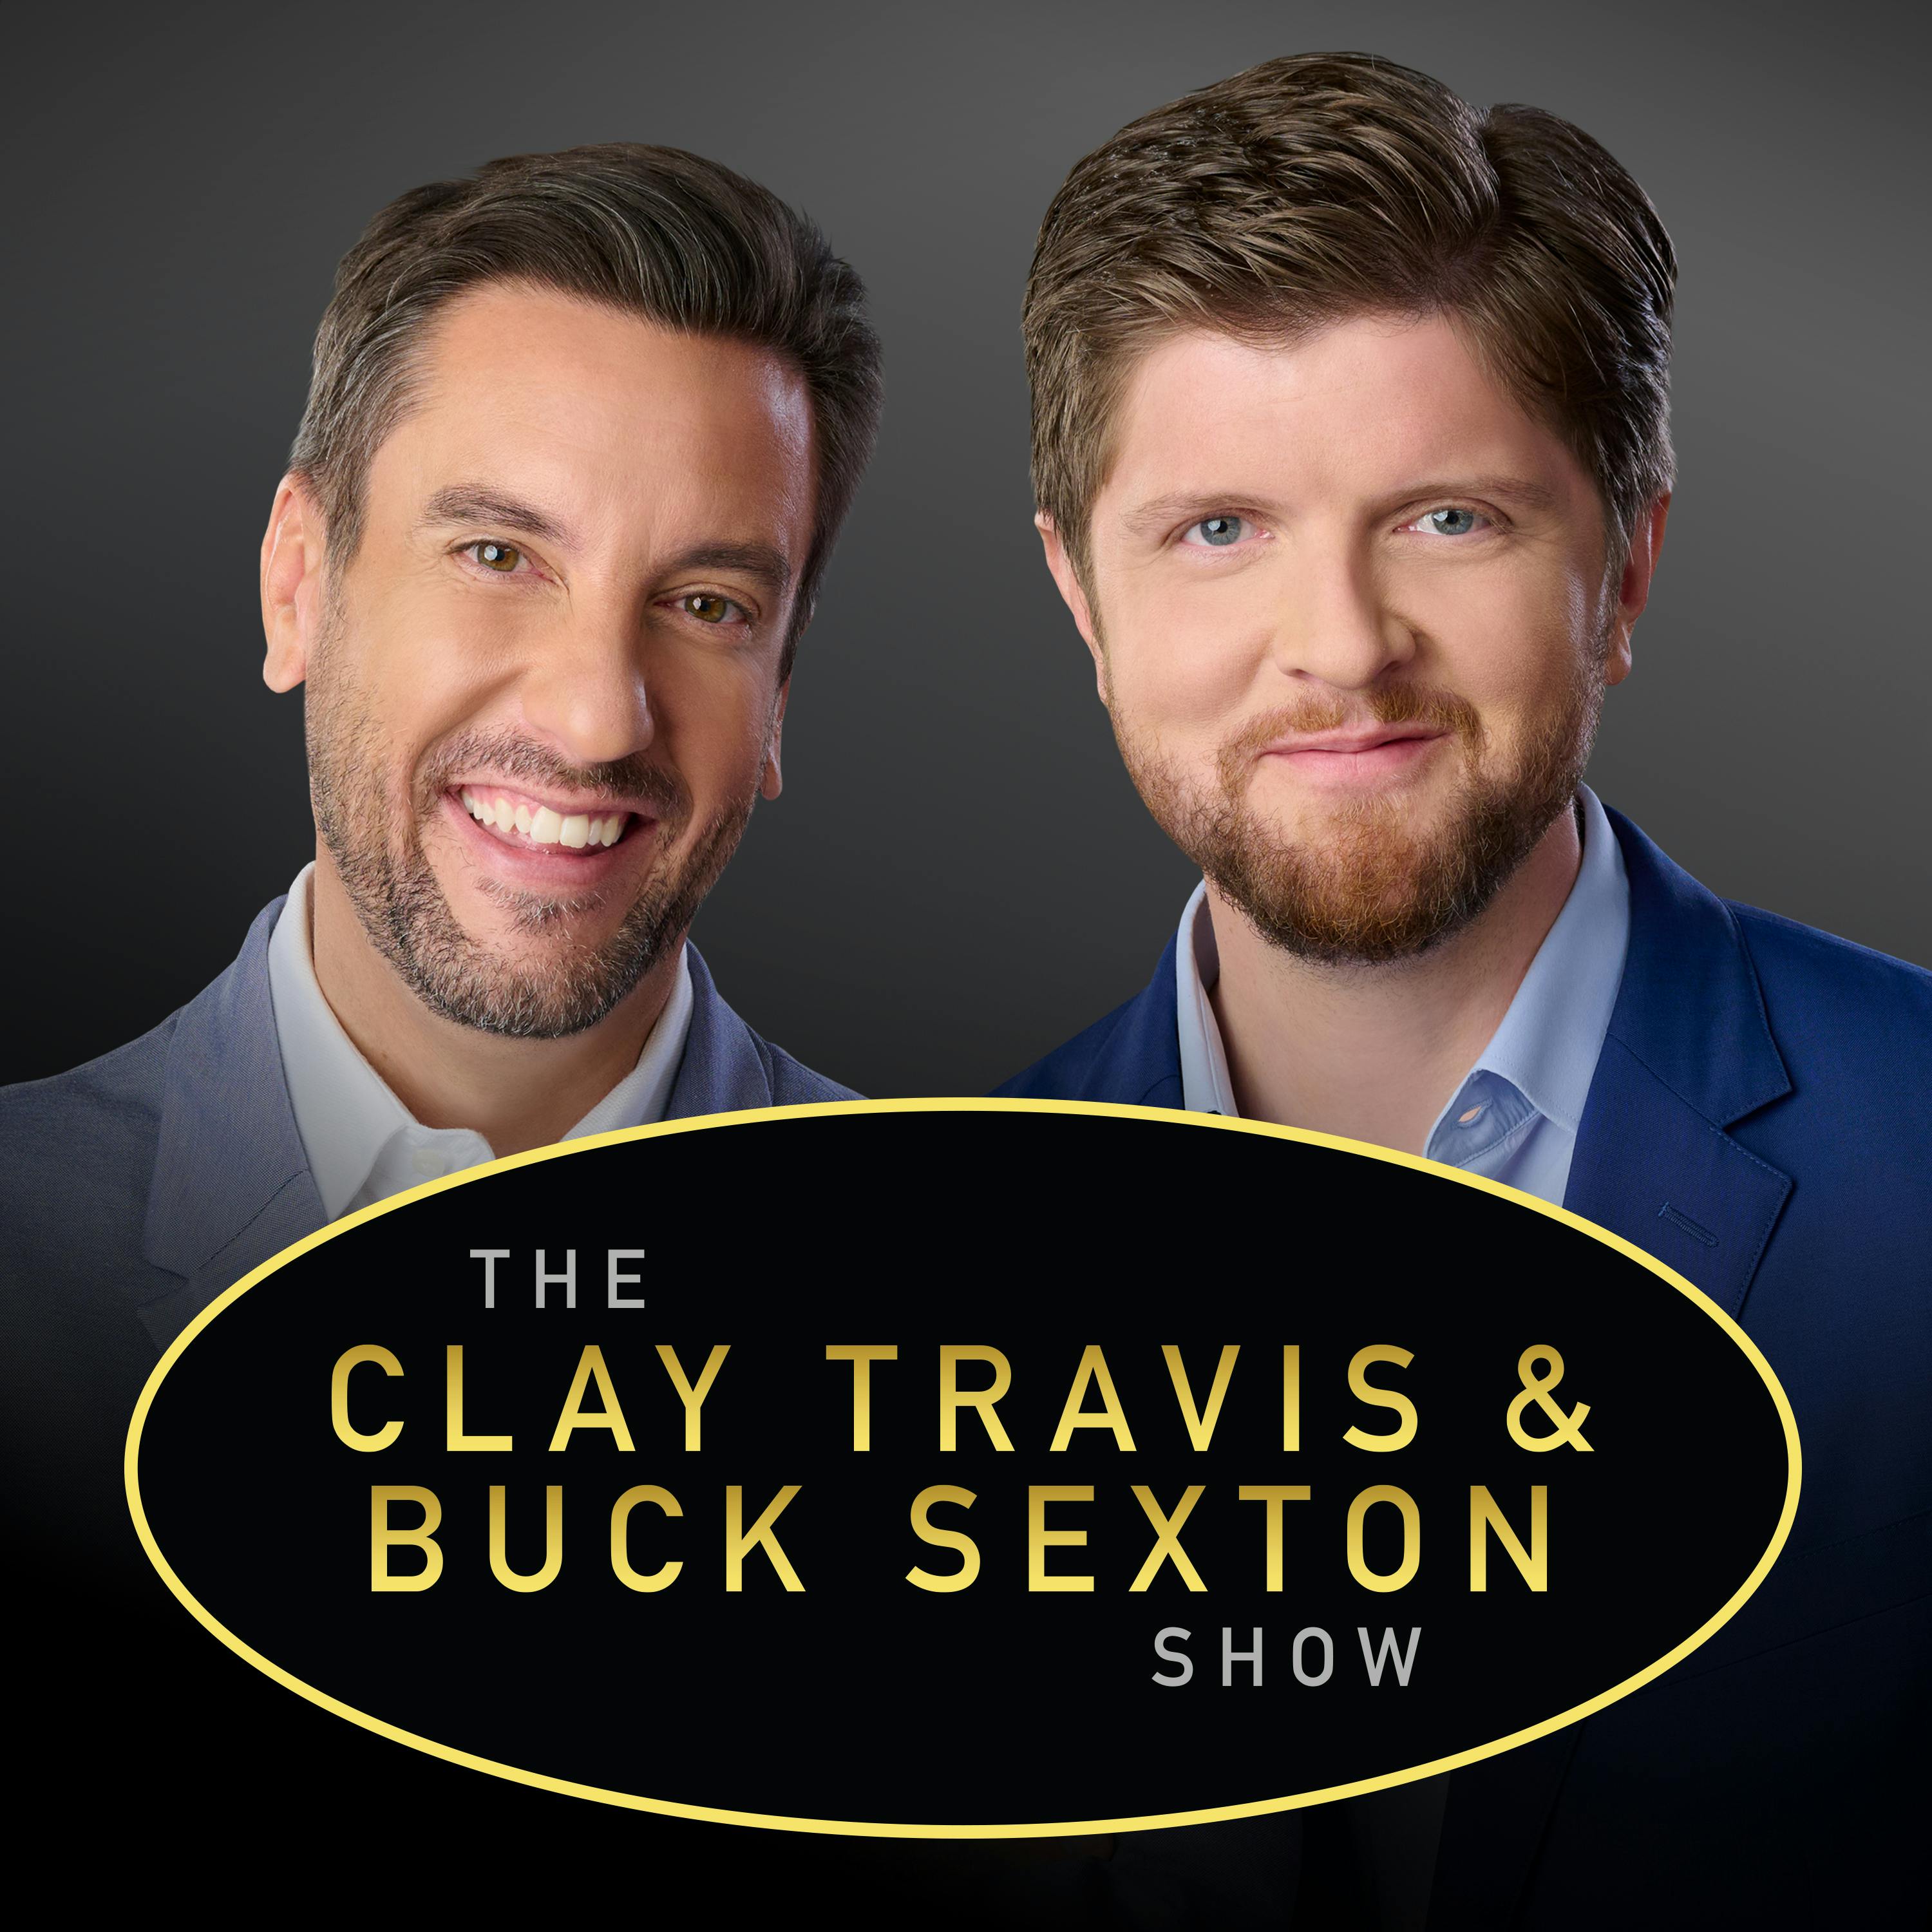 Clay Travis and Buck Sexton Show H2 – Jan 19 2022